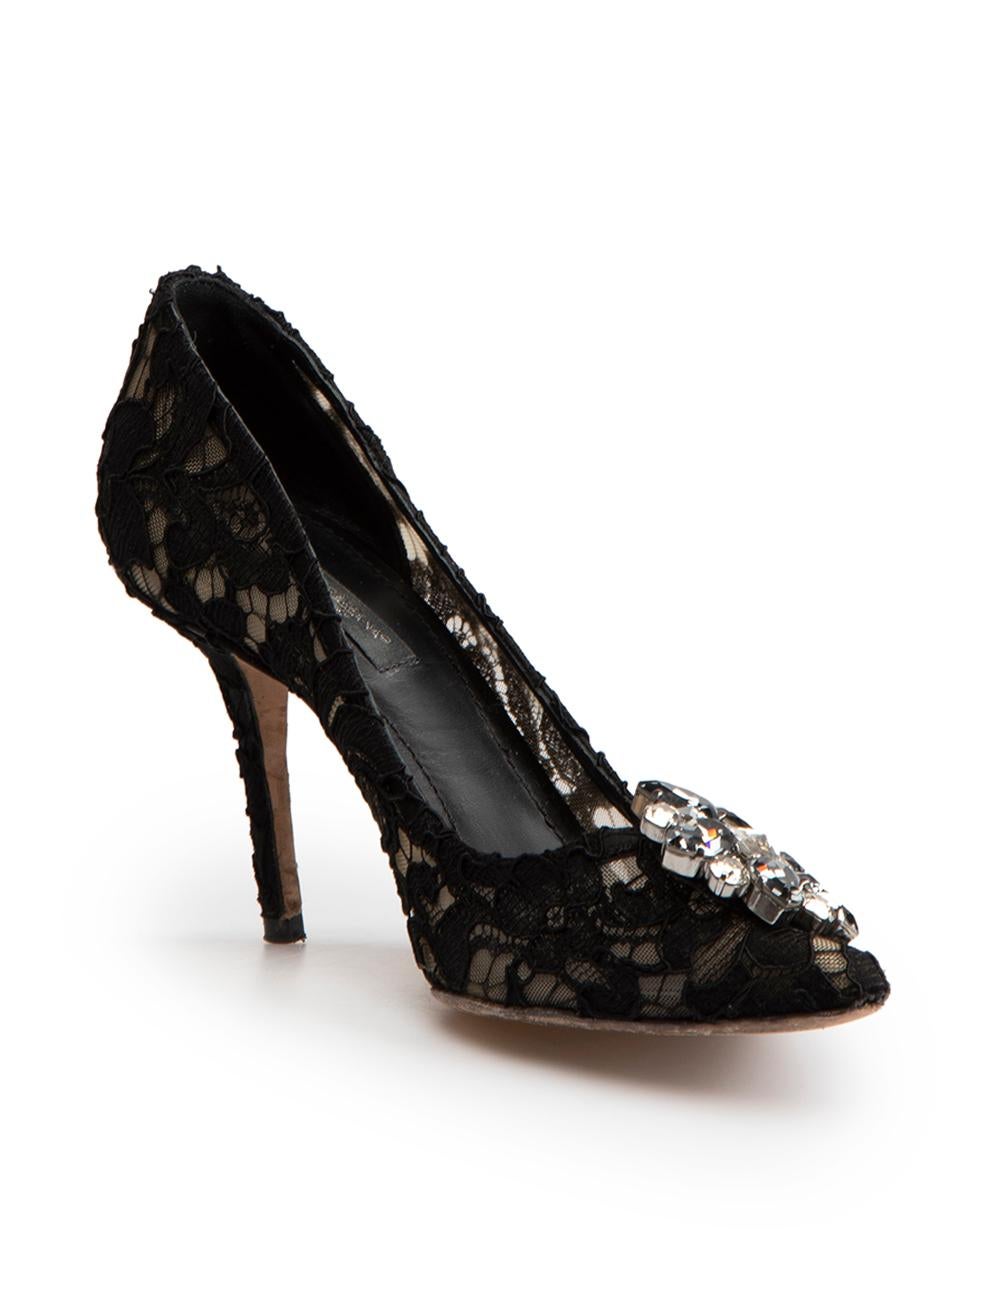 CONDITION is Very good. Minimal wear to shoes is evident. Minimal wear to the heels and toes of both shoes with unravelling of the lace on this used Dolce & Gabbana designer resale item.
 
 Details
 Black
 Lace
 Slip on pumps
 Pointed toe
 High